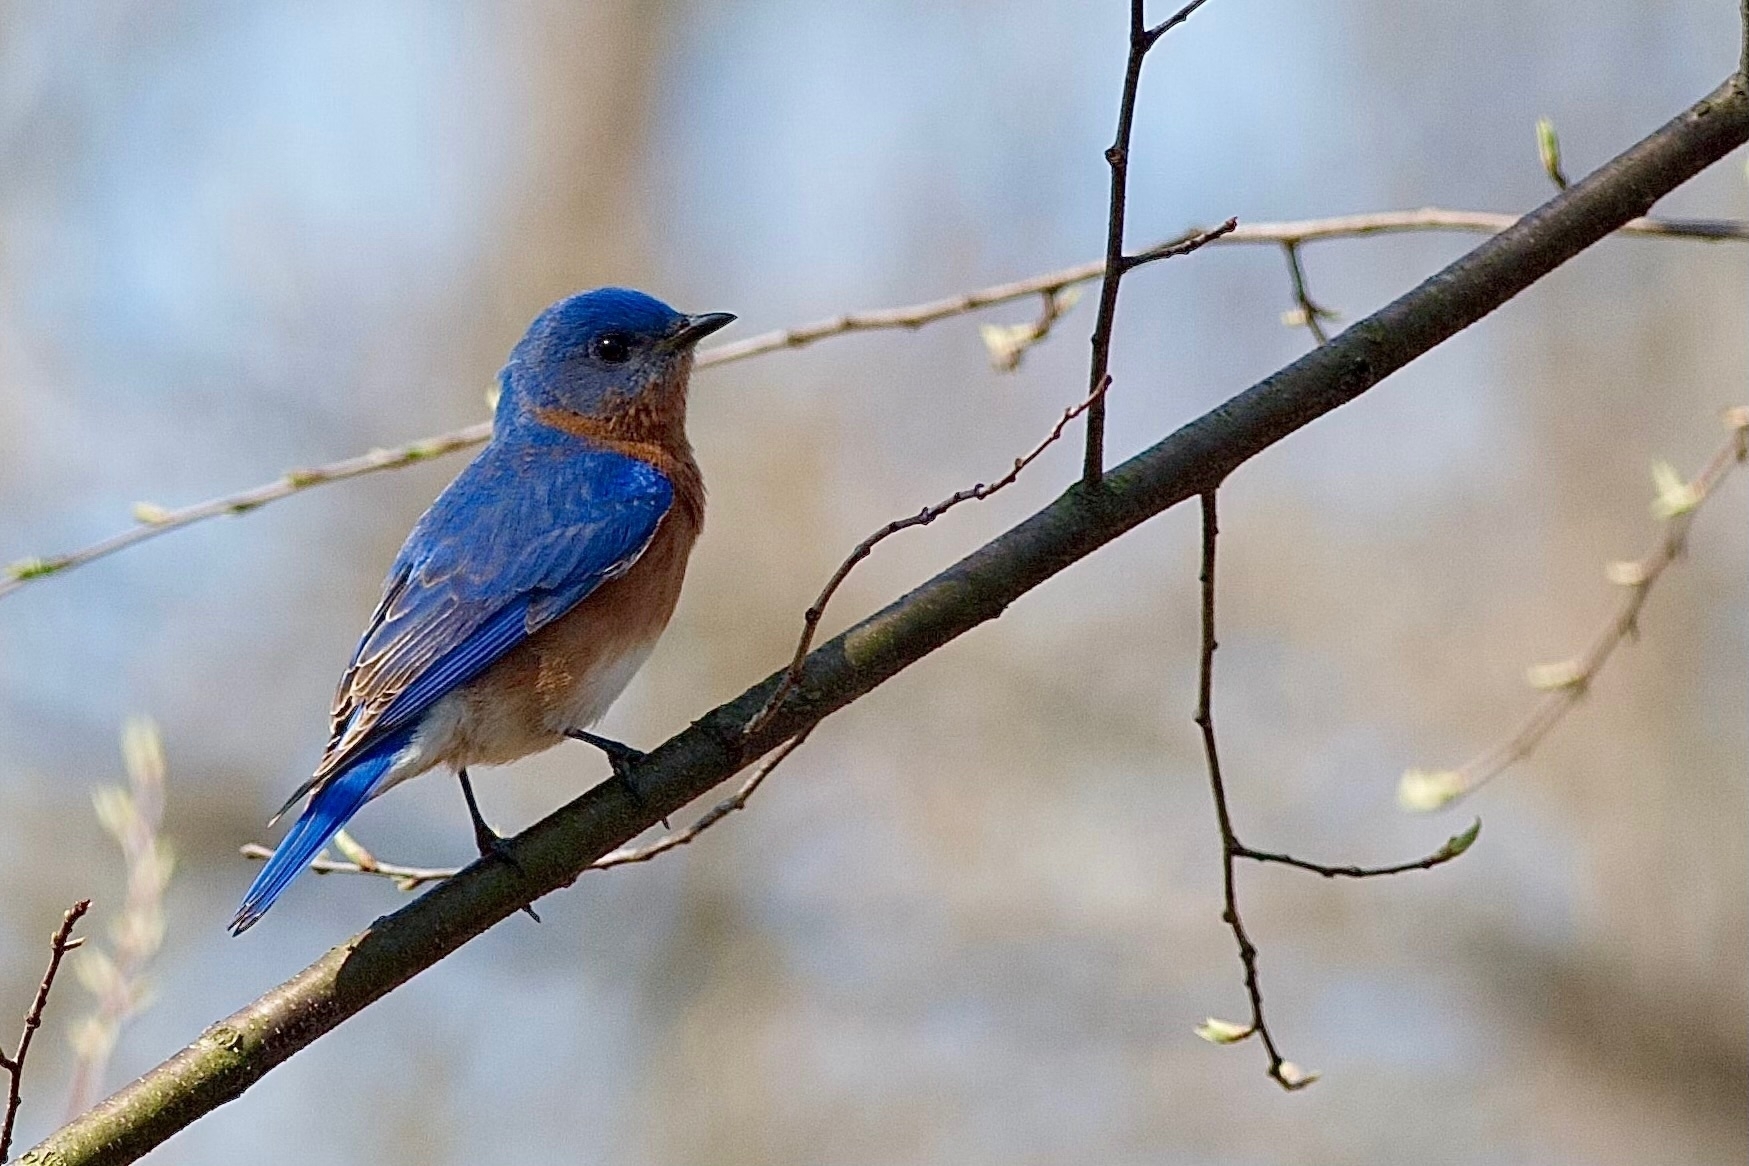 A Bluebird perched on a branch and facing sideways. It's head, back and wing feathers are vibrant blue. The golden brown front of the bird is also visable. The background is blurred forest.